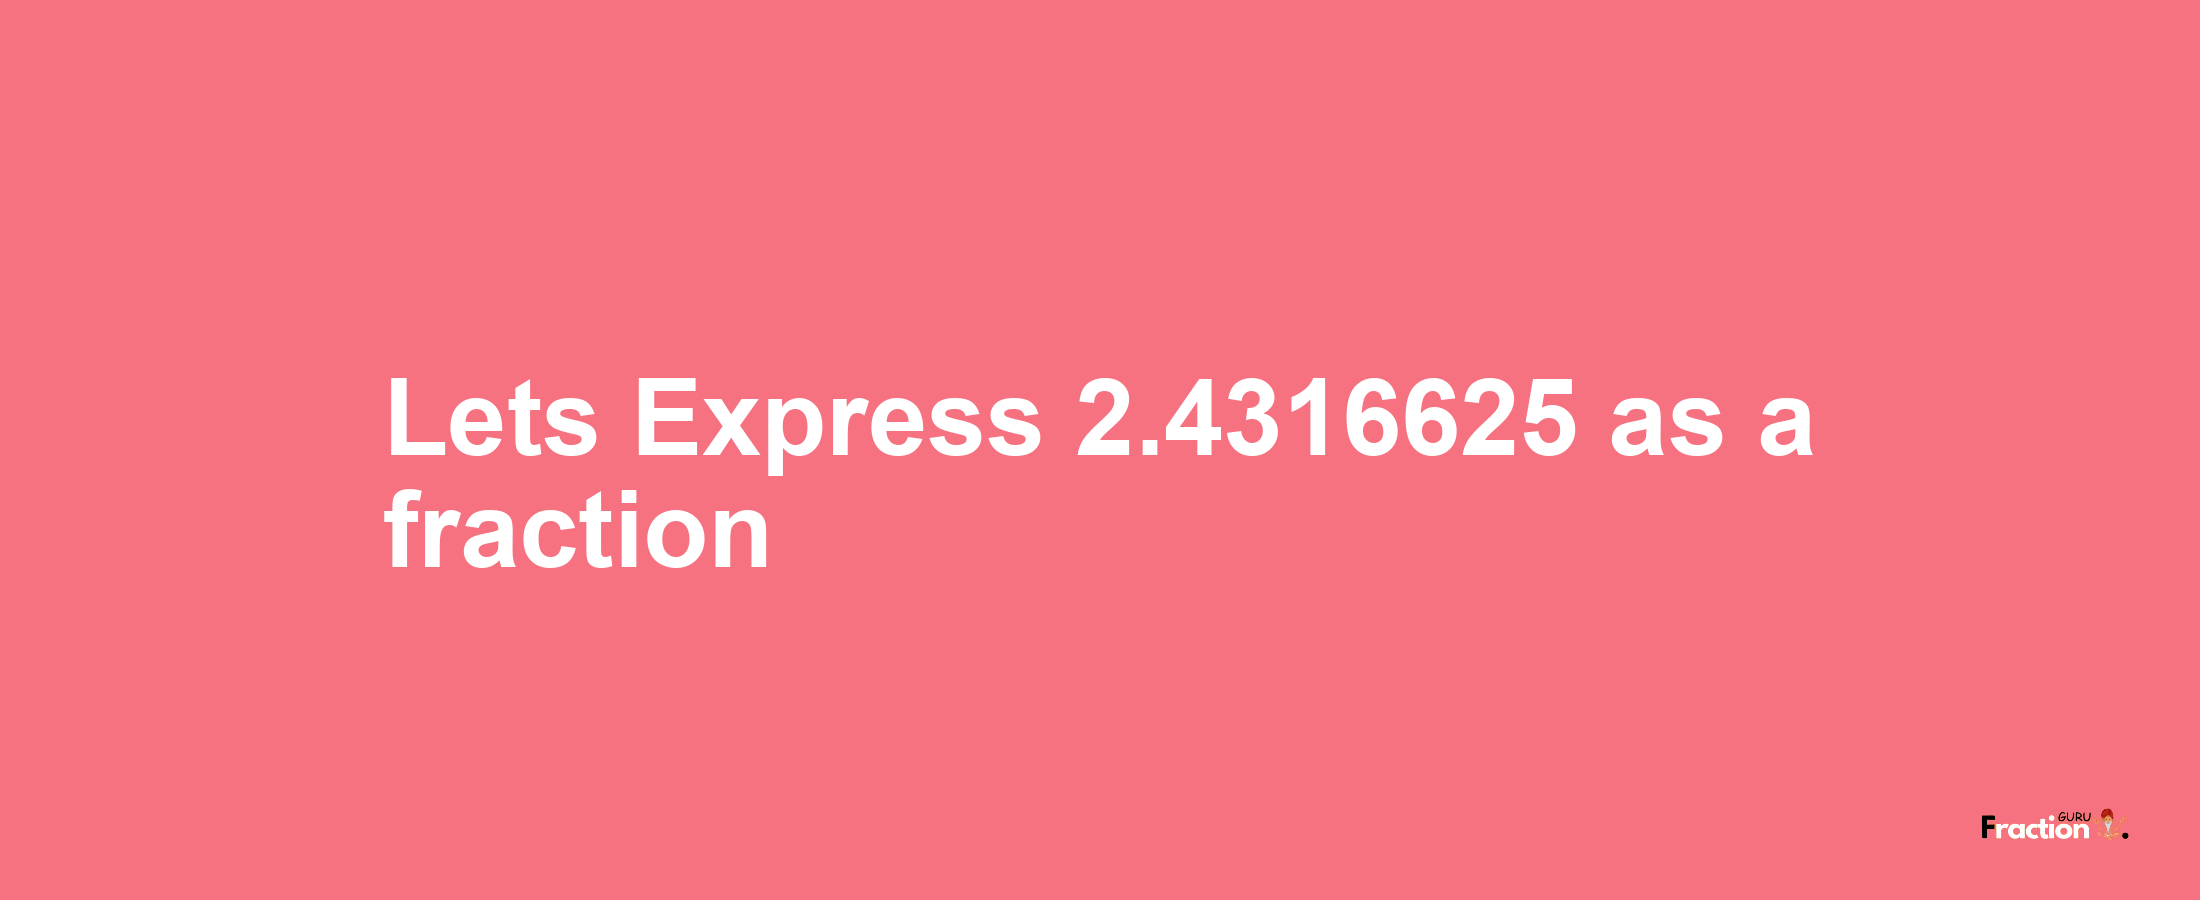 Lets Express 2.4316625 as afraction